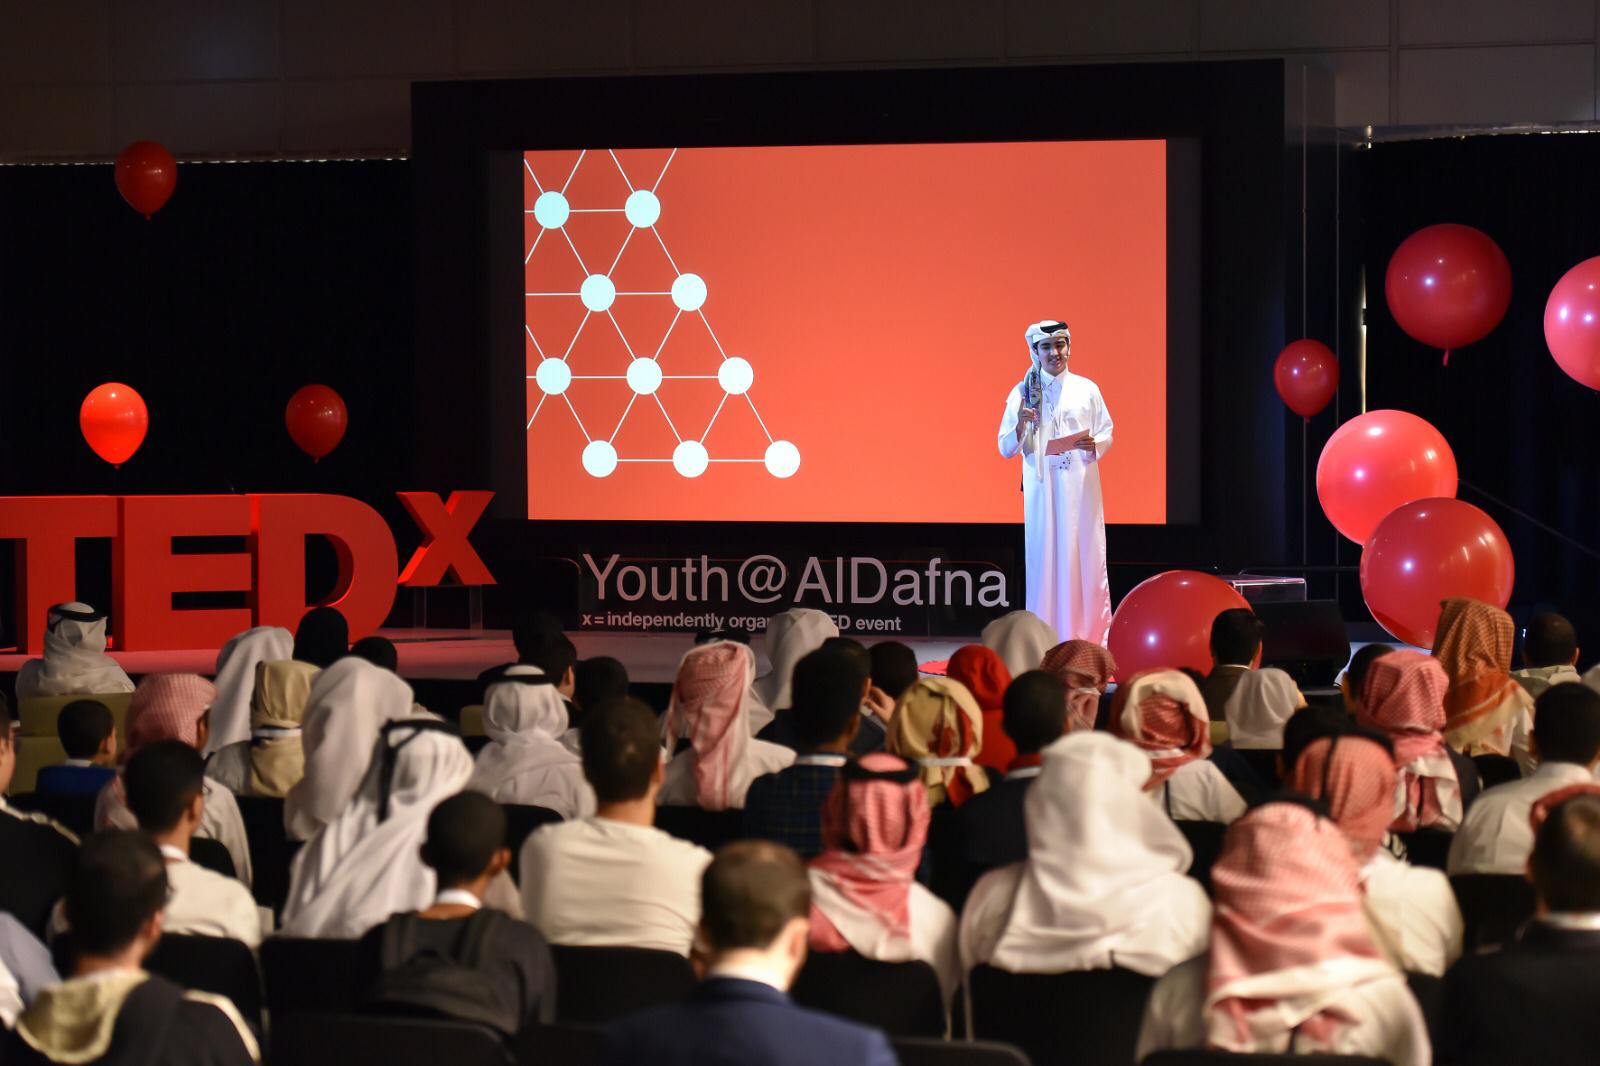 The first TEDxYouth conference in Qatar QatarDebate Center